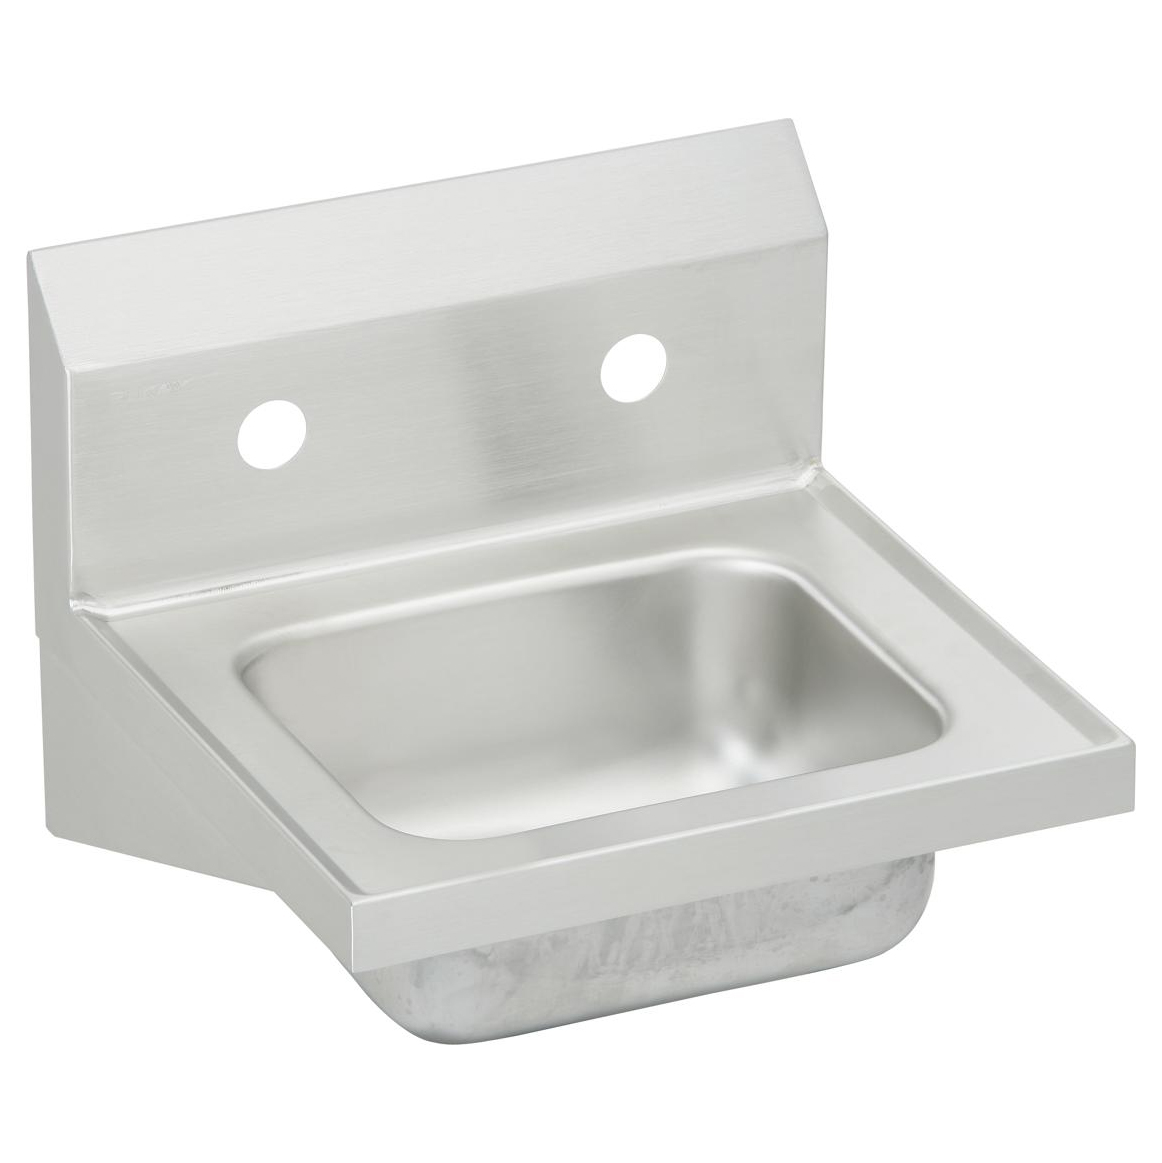 Stainless Steel 16-3/4x15-1/2x13" Wall Hung Handwash Sink